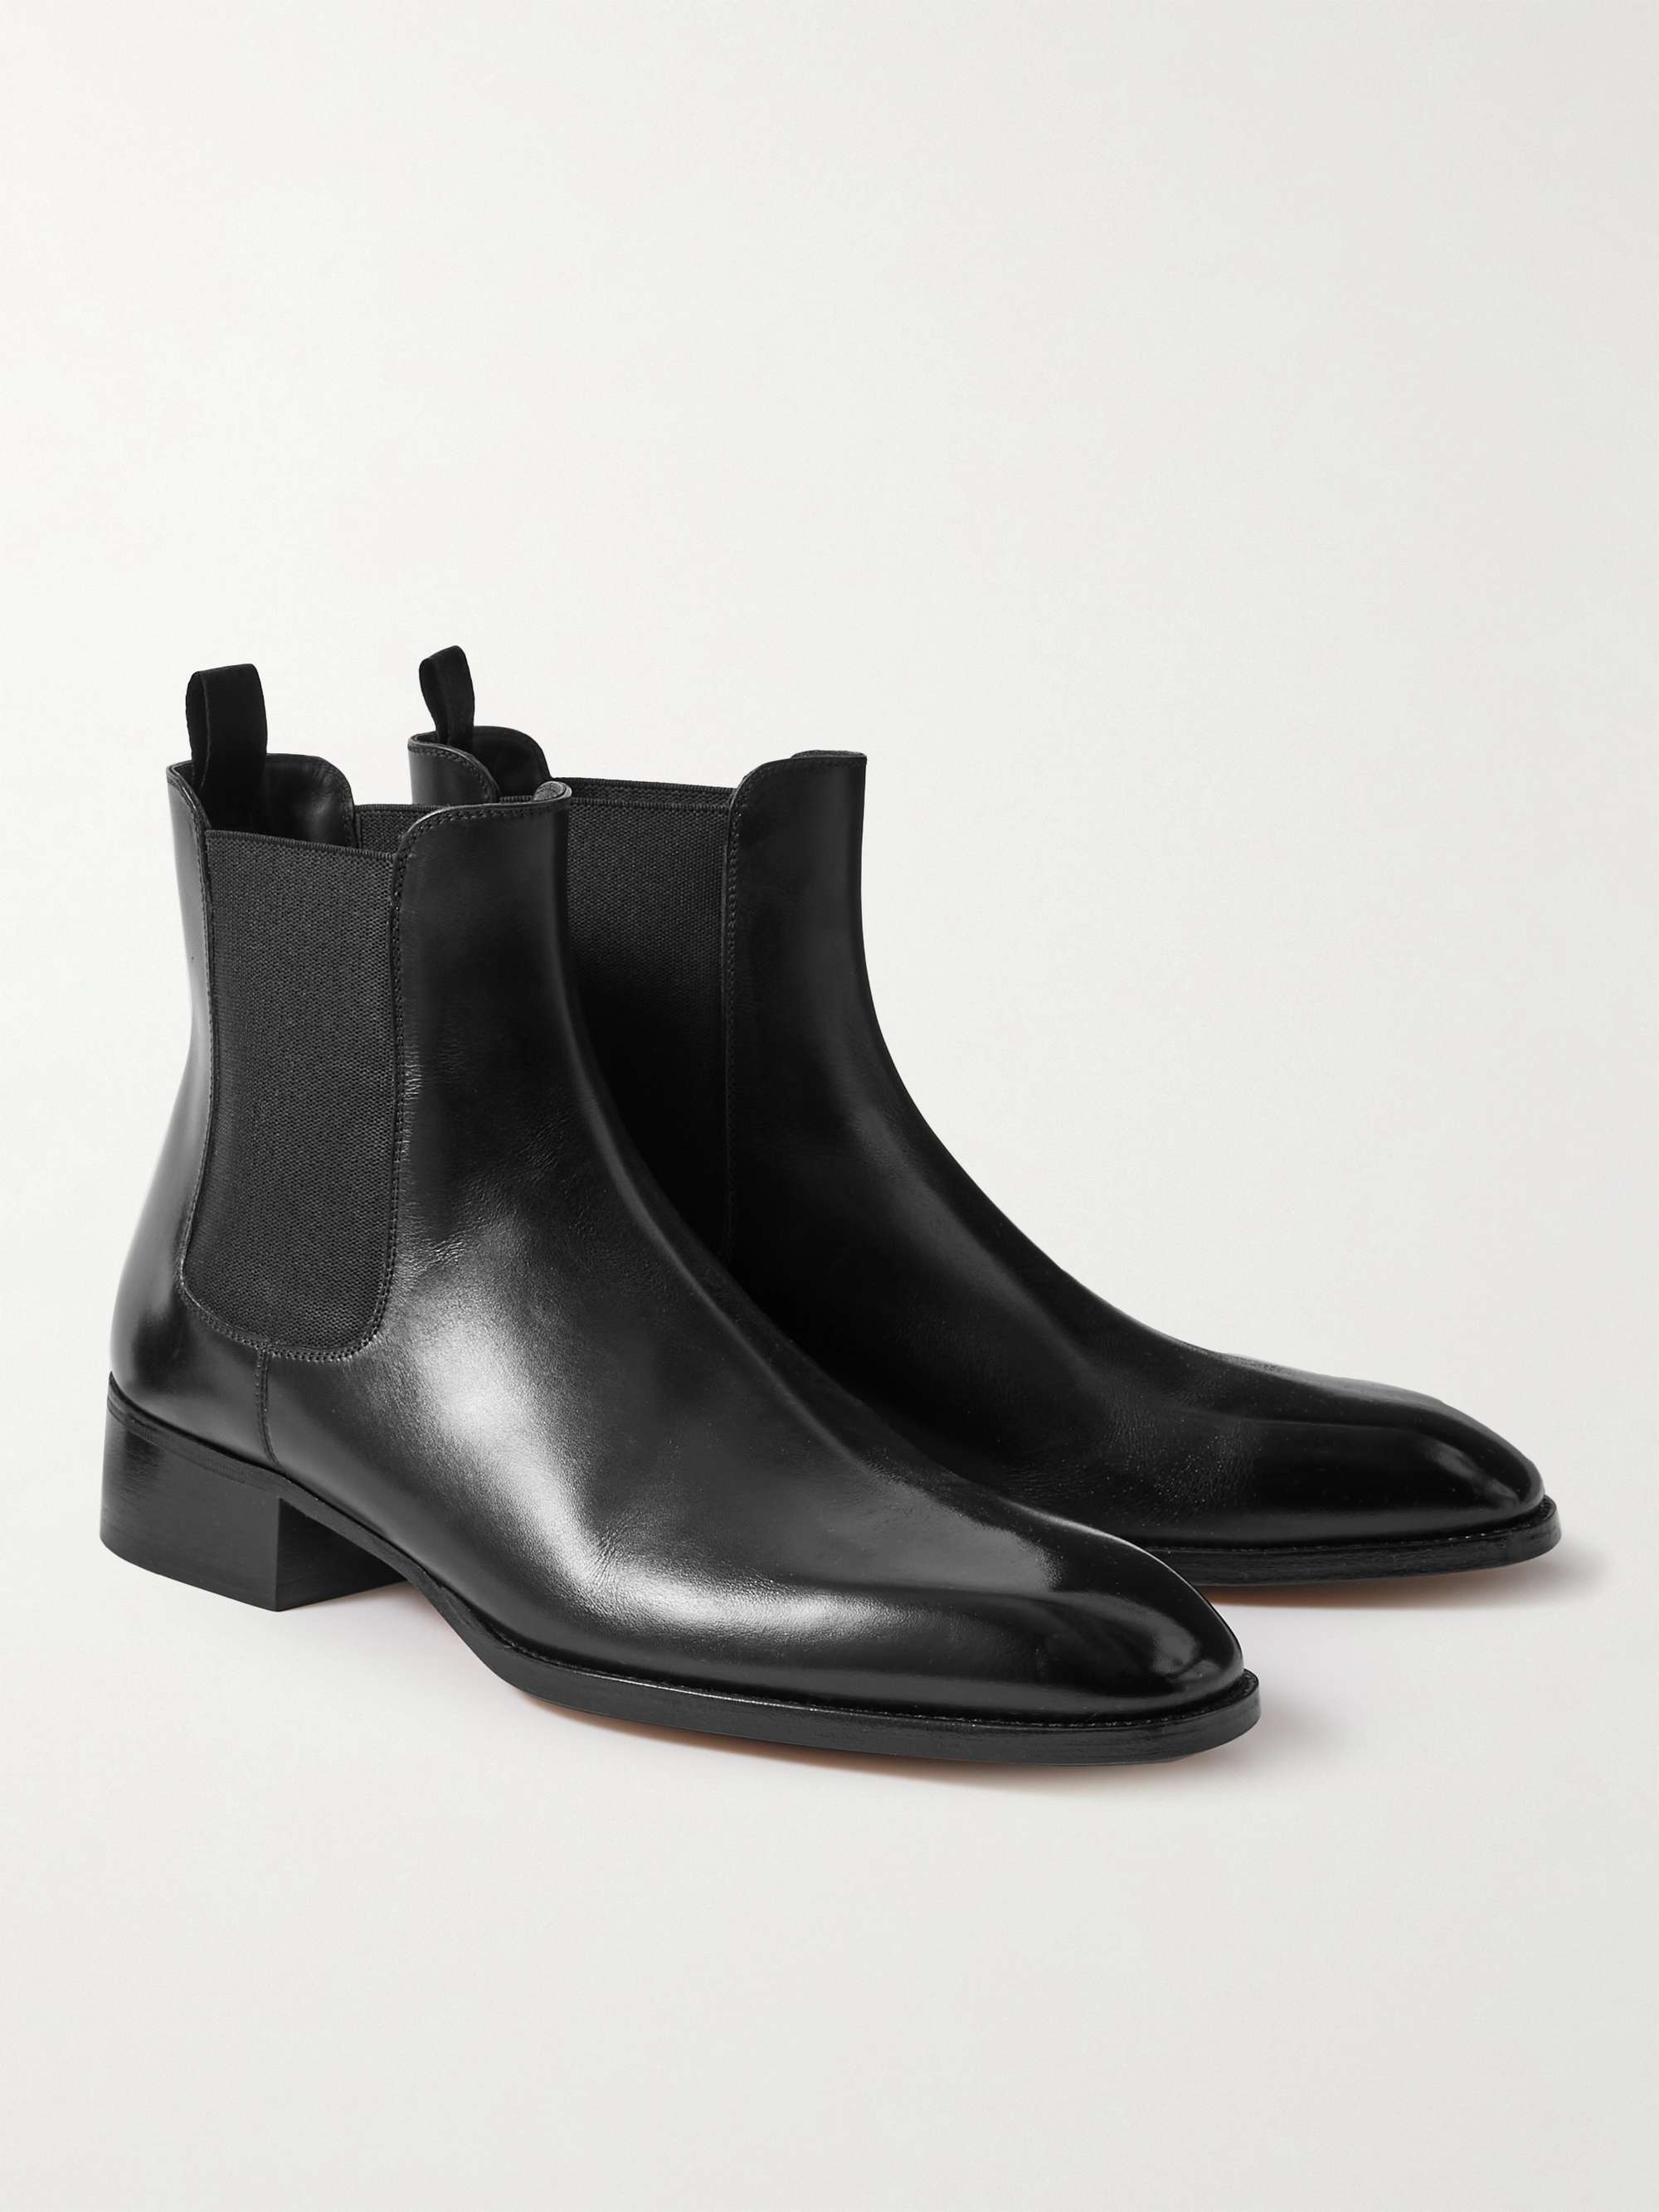 TOM FORD Leather Chelsea Boots